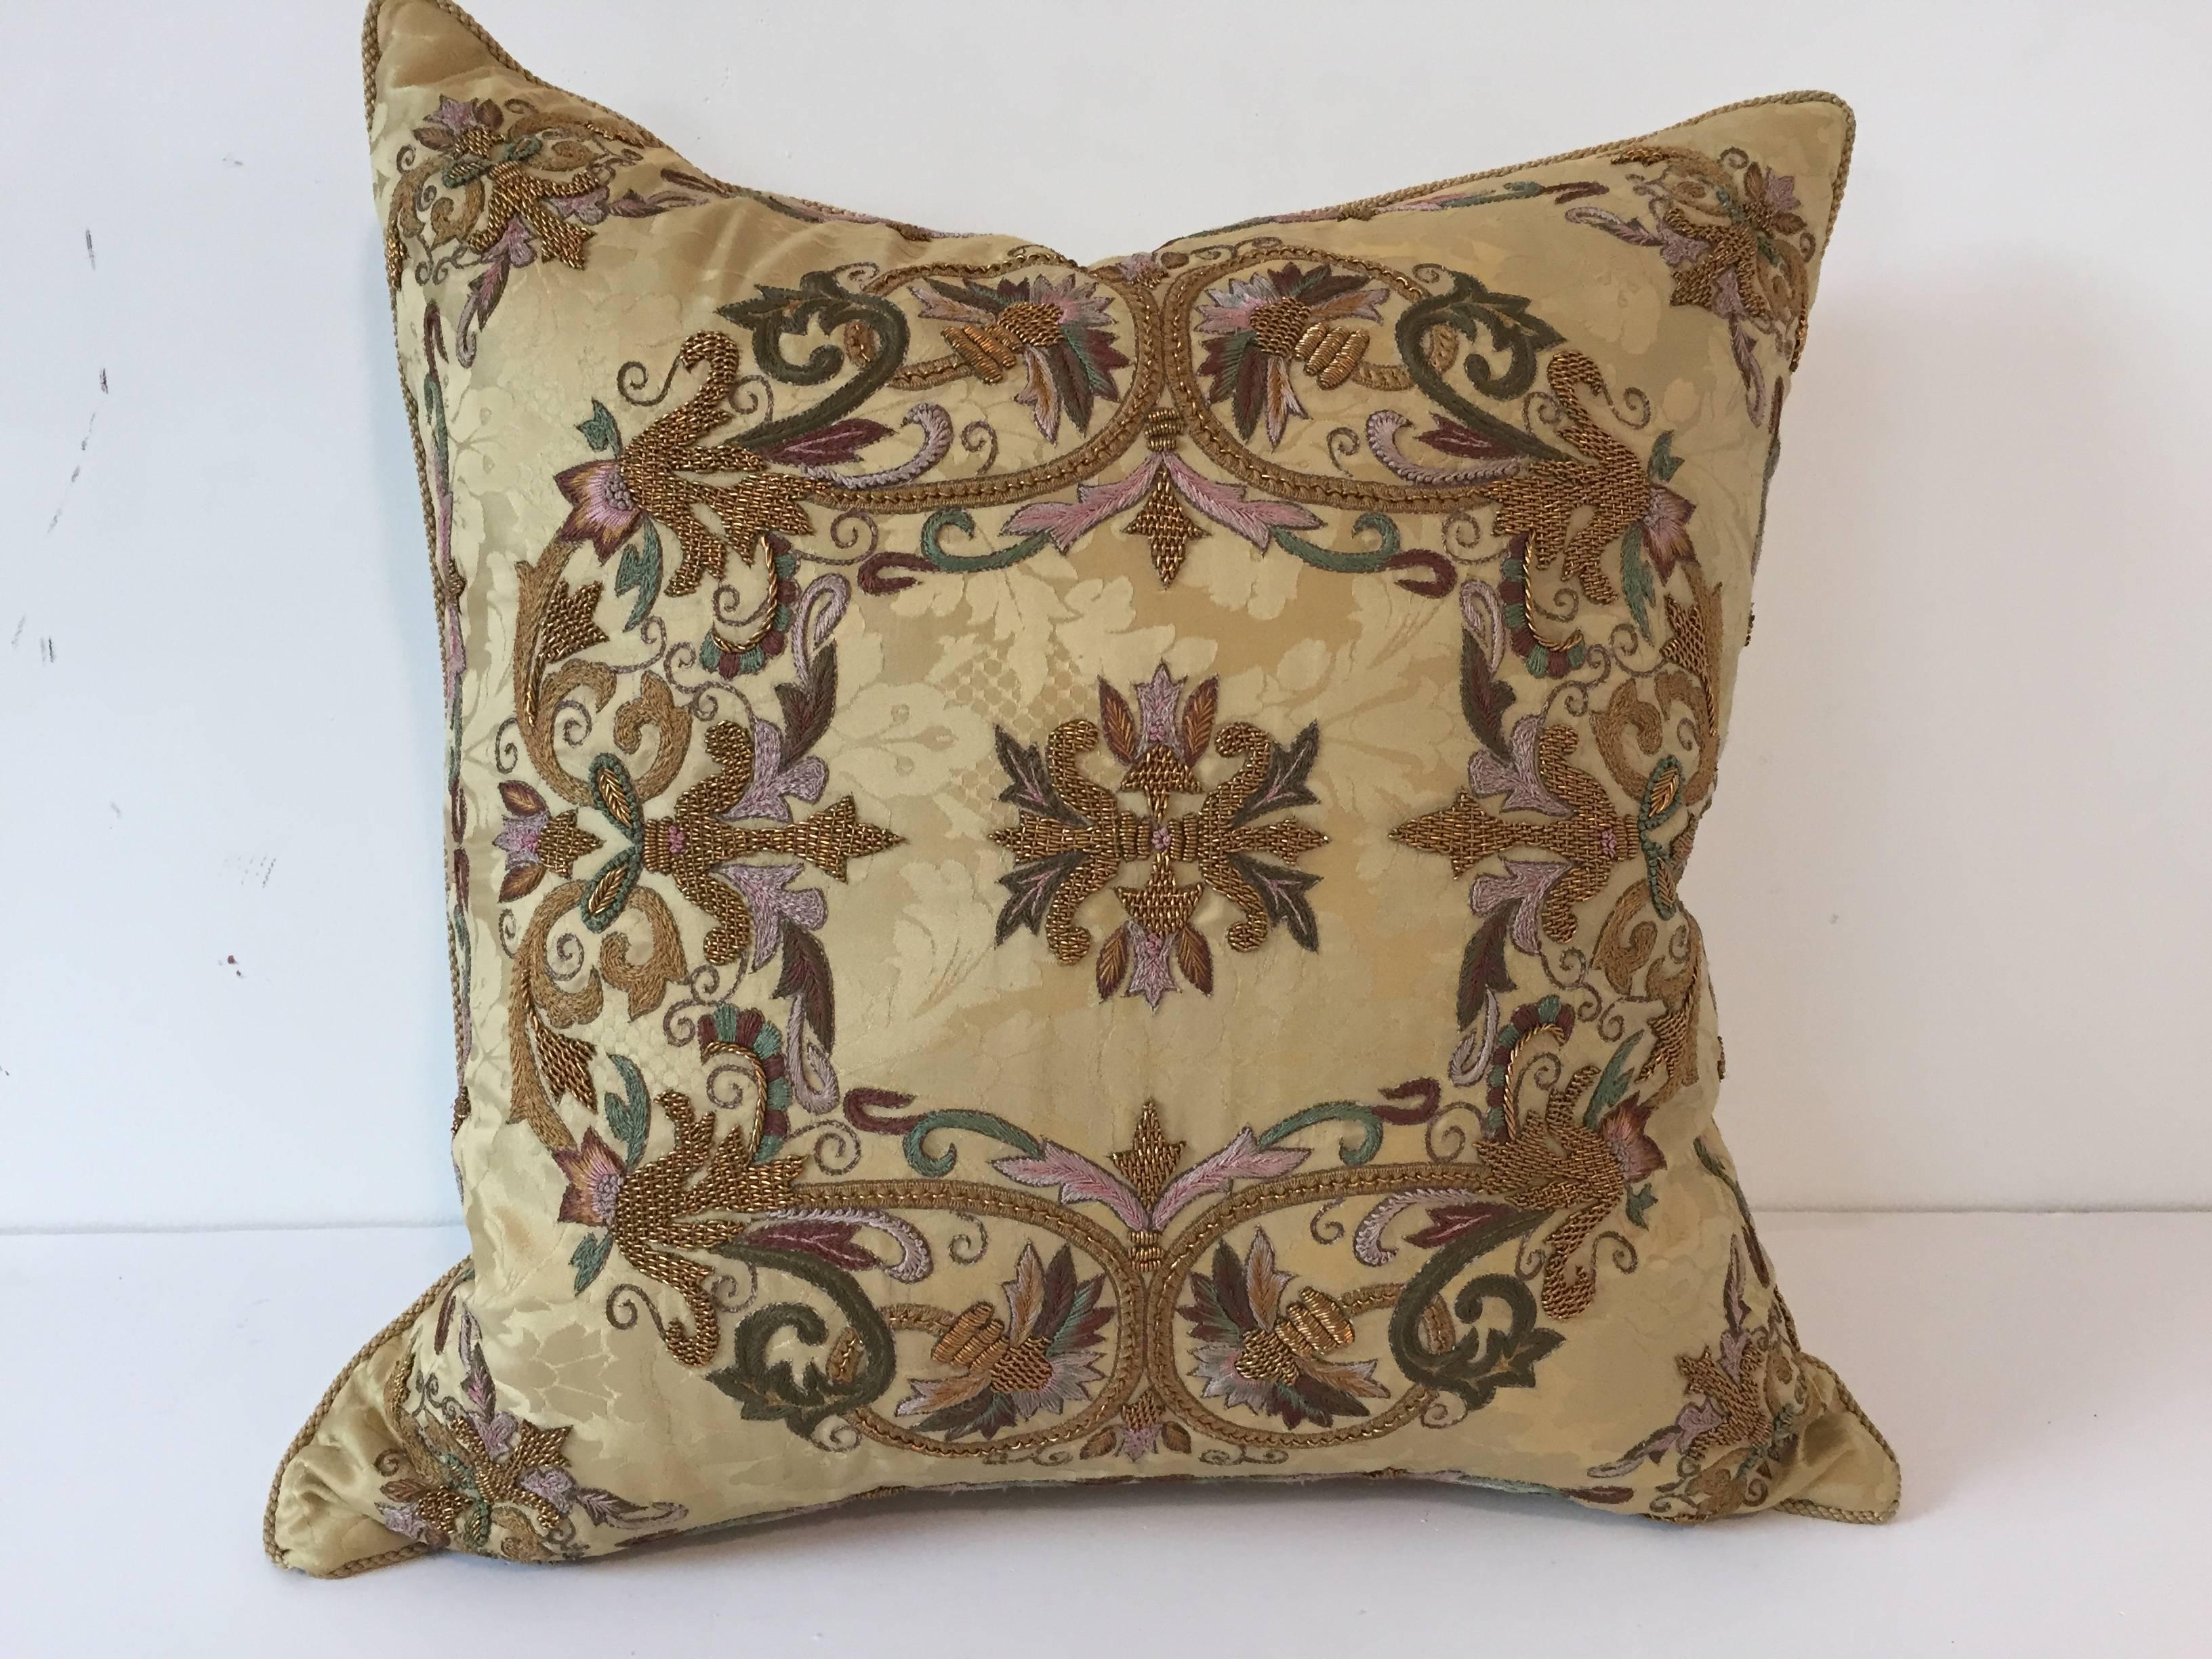 Elegant pair of designer throw pillows, satin embroidered with metal gold thread and polychrome embroideries.
By textile designer Gerry Nichol Inc New York.
Down pillow insert.
Size: 20 in. x 20 in.